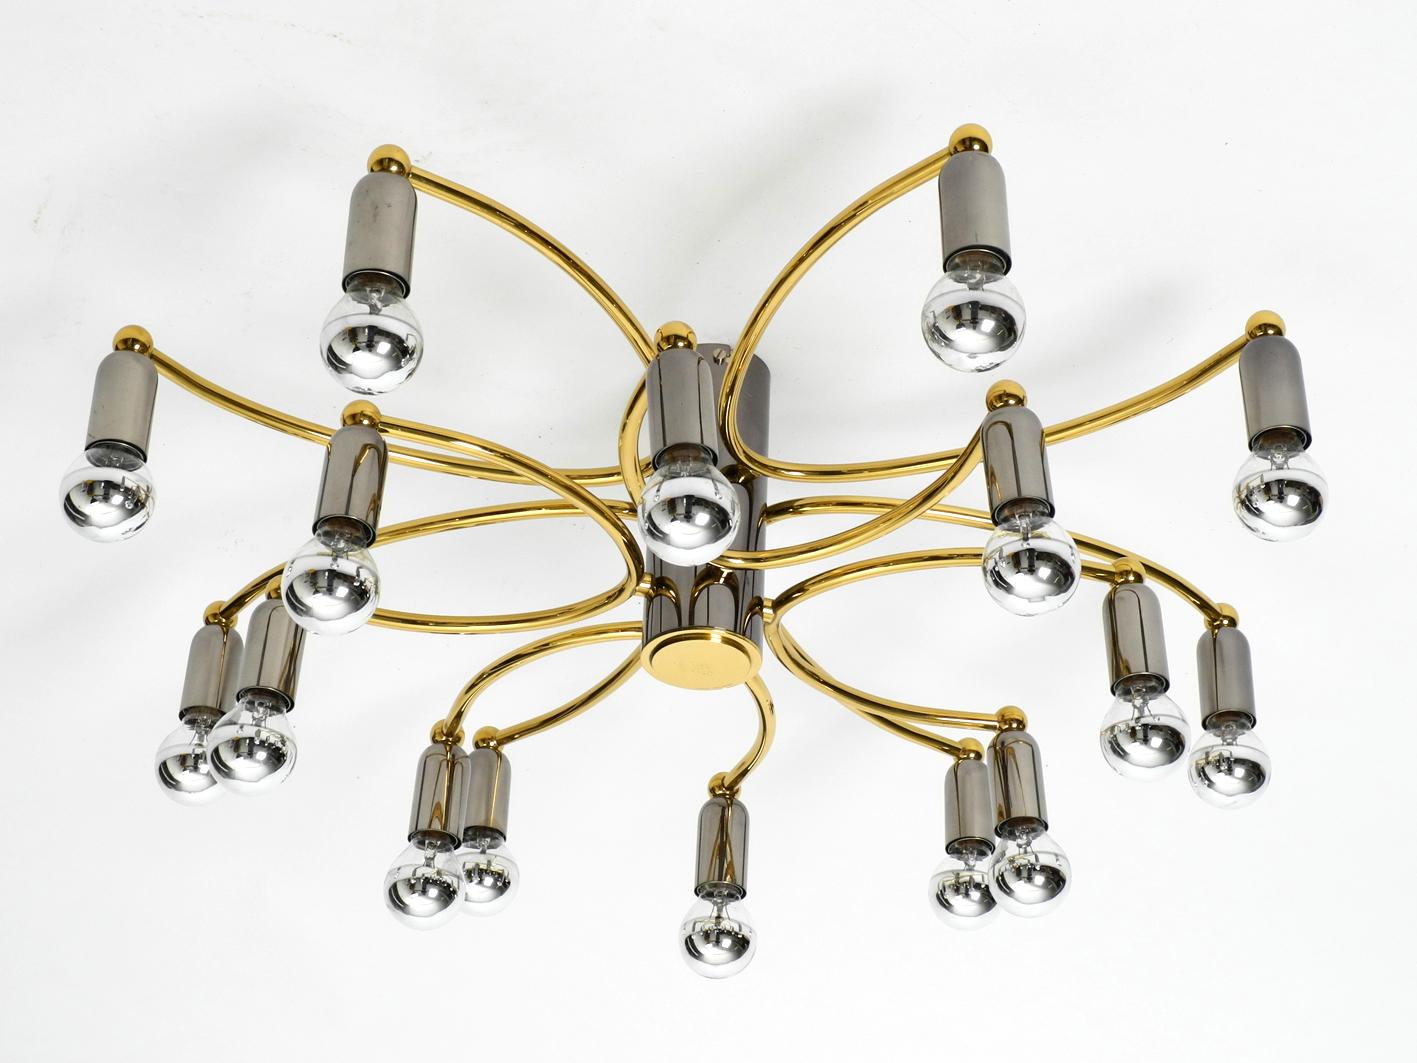 Post-Modern 1980s 16-Armed Extra Large Ceiling Lamp by Cosack, Made of Brass and Chrome